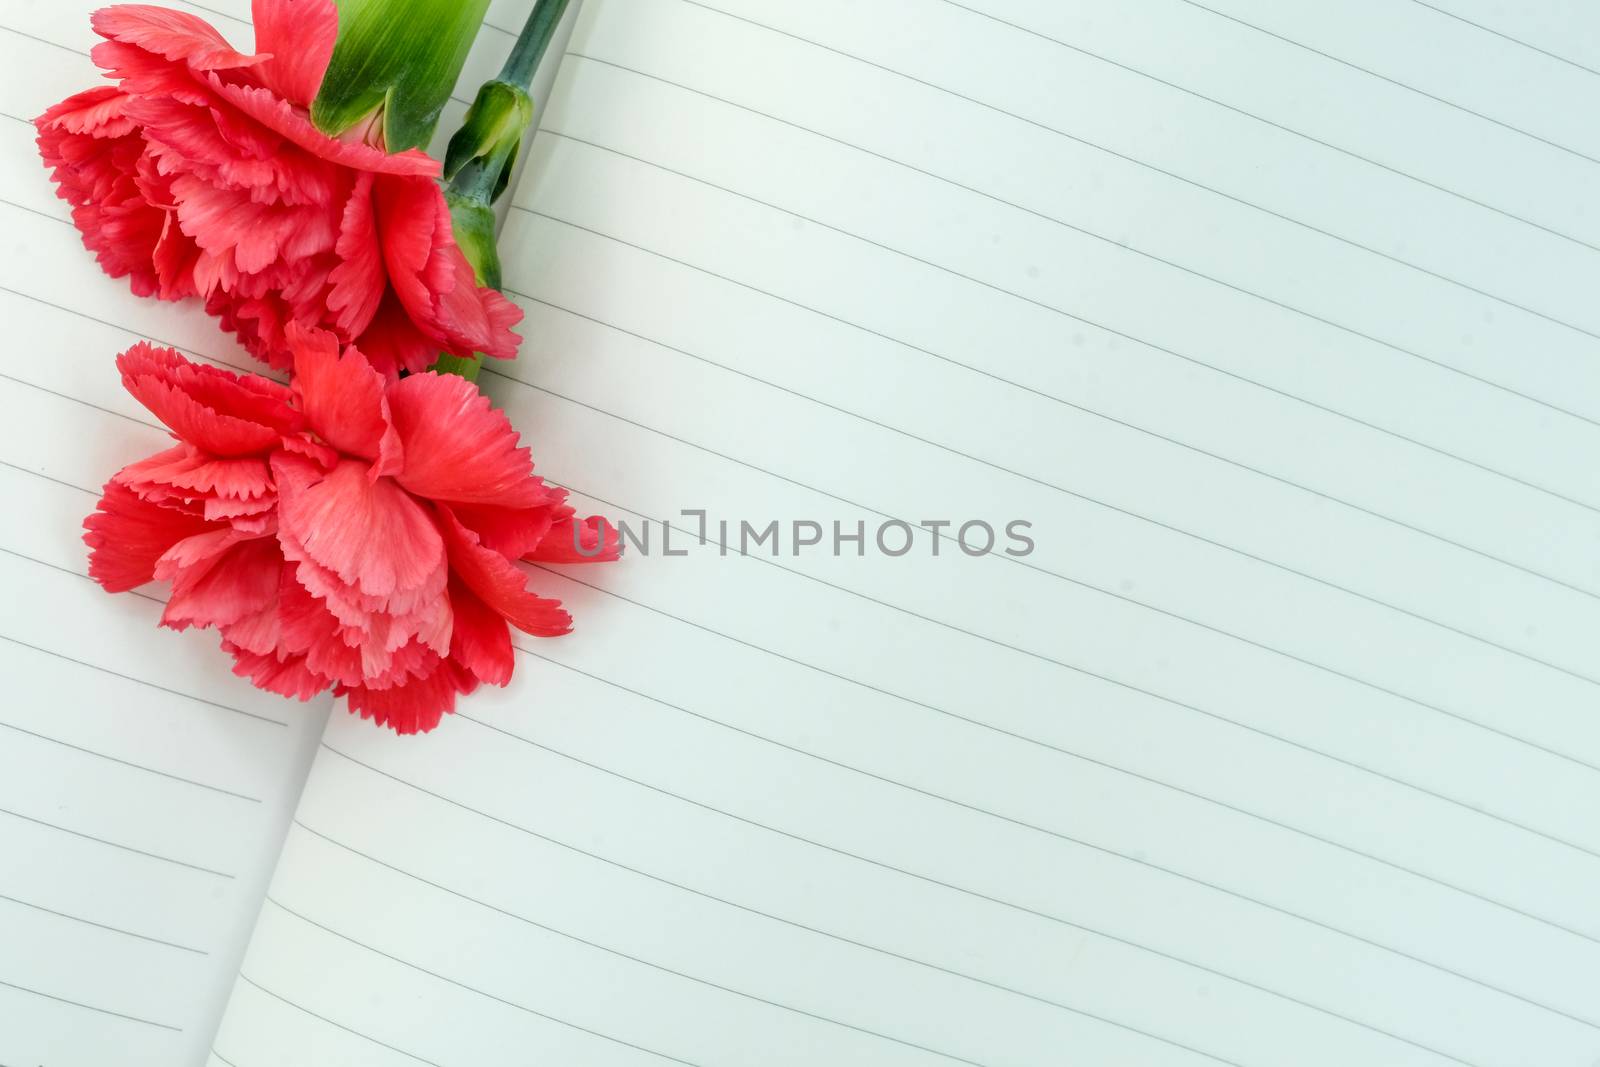 two beautiful pink carnations on empty pages of a notebook